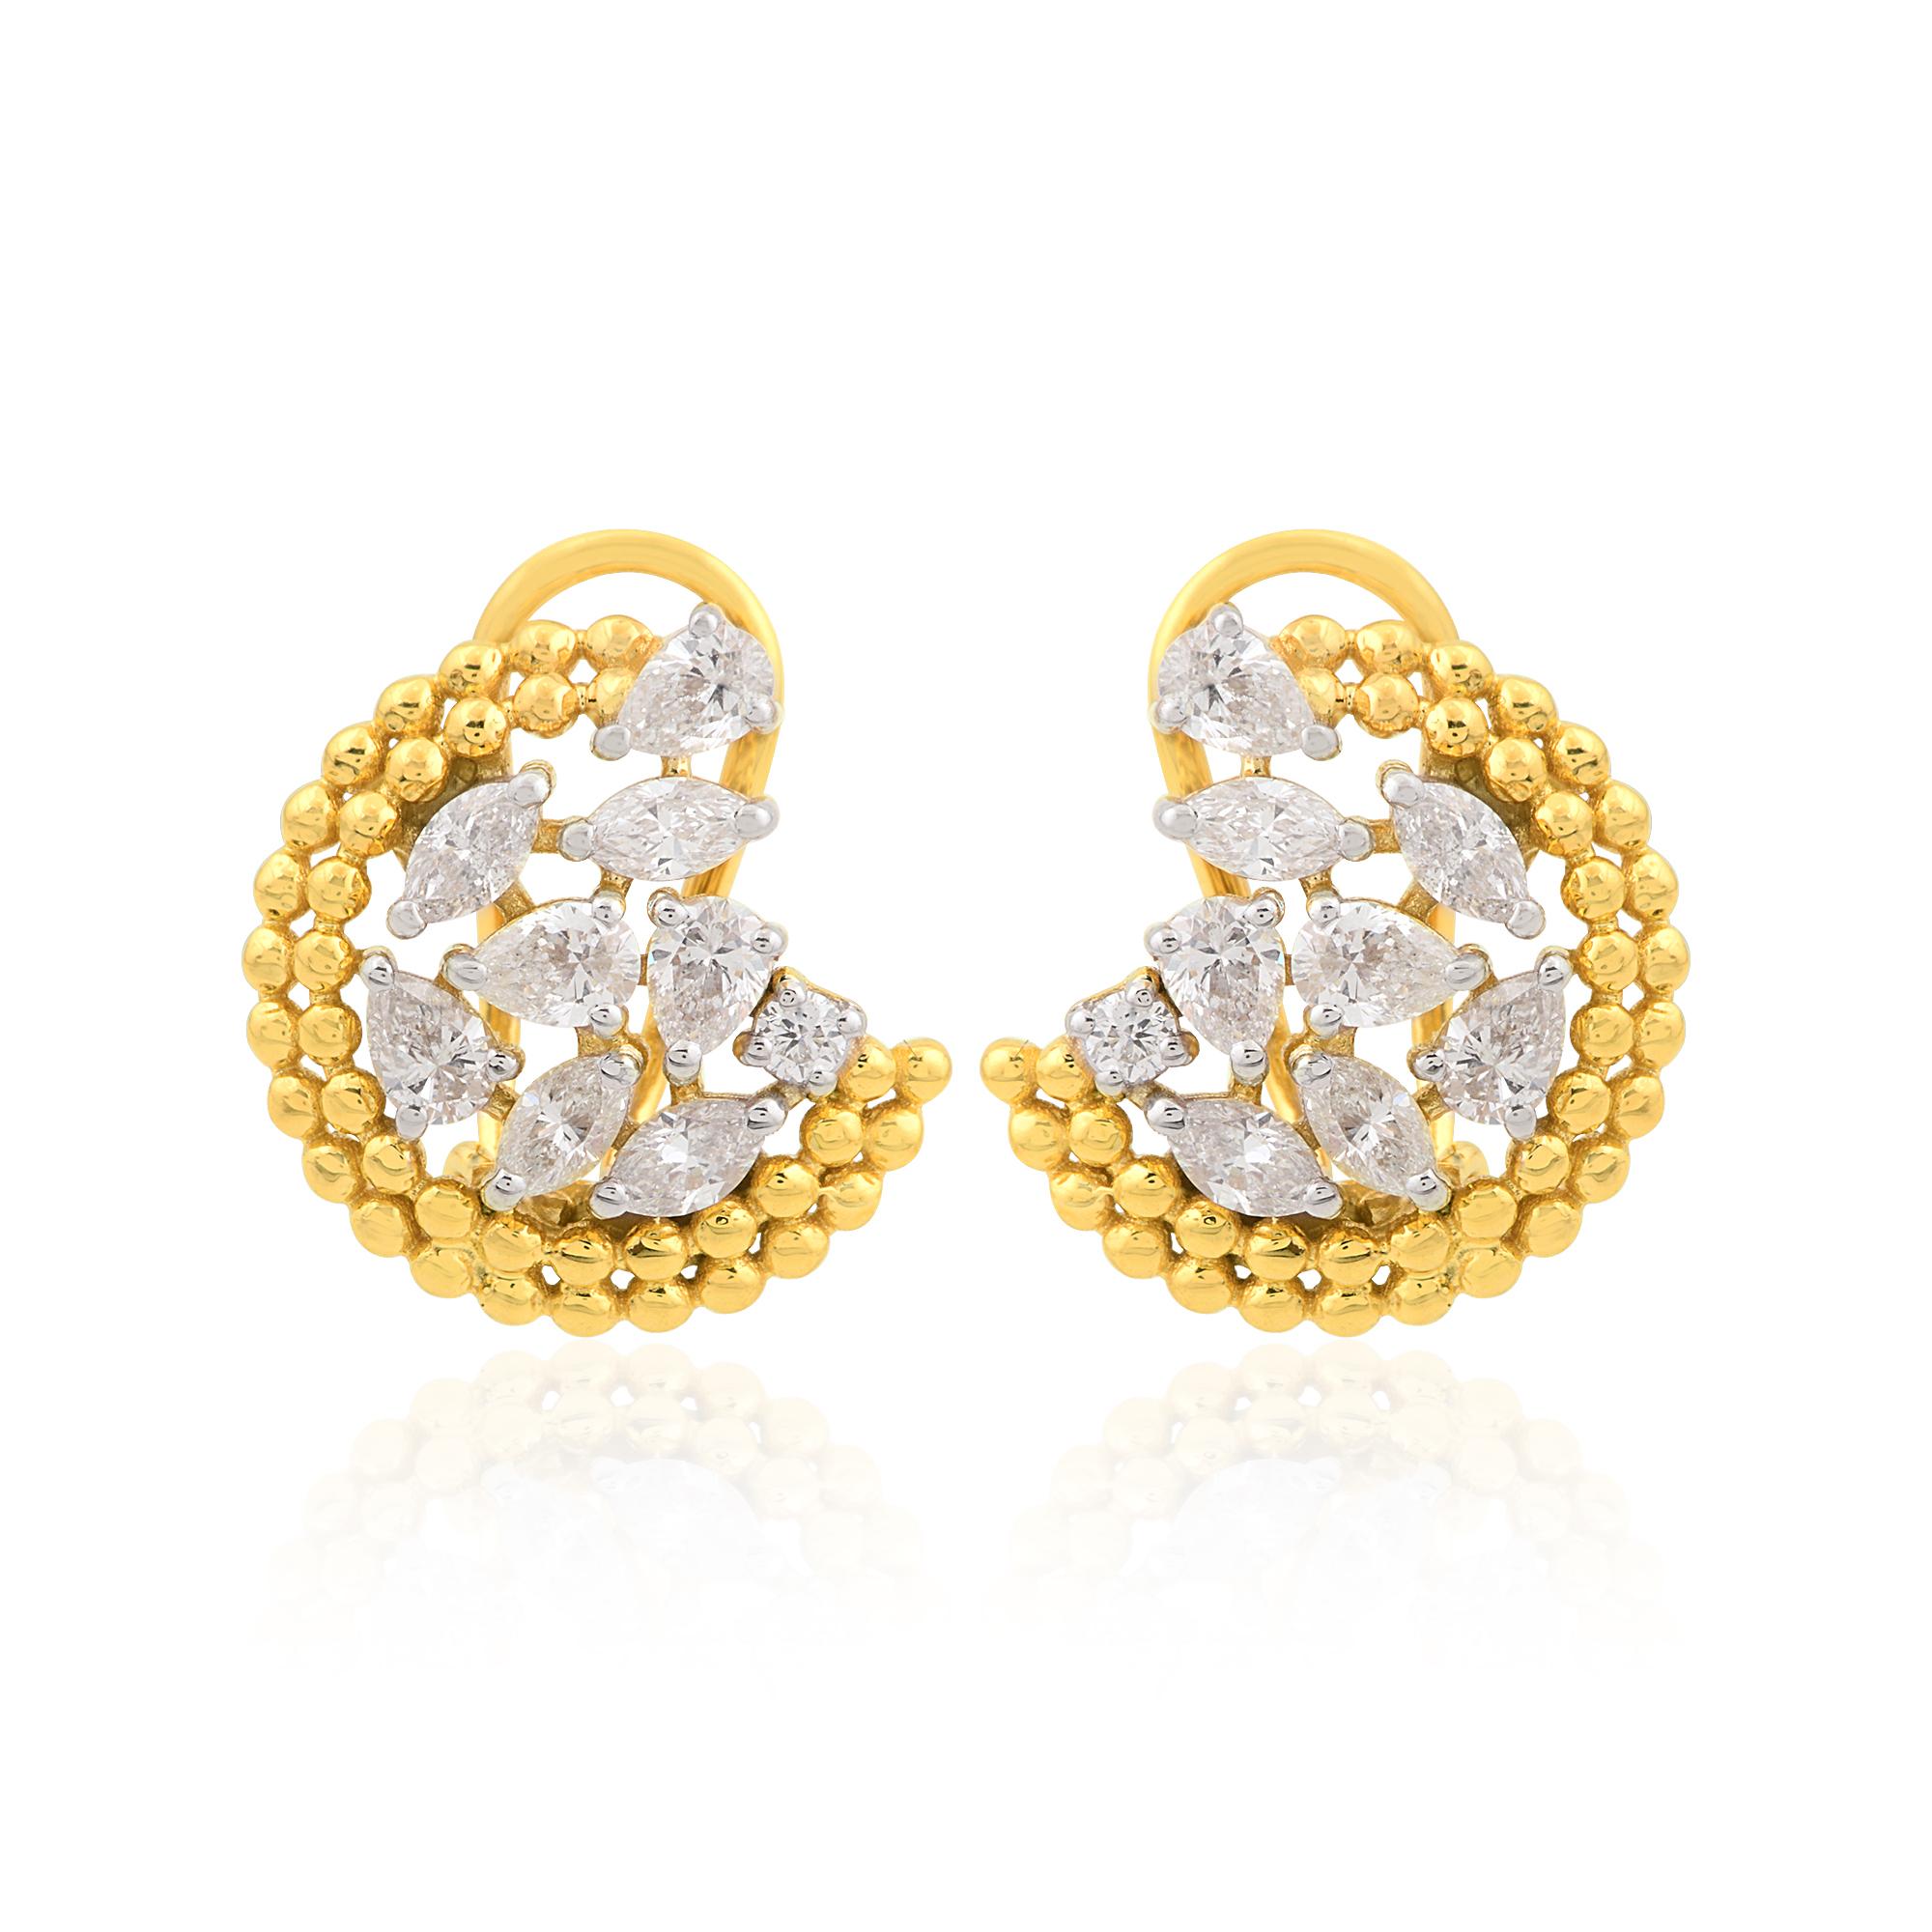 Item Code :- SEE-1868
Gross Wt. :- 7.33 gm
18k Yellow Gold Wt. :- 7.01 gm
Diamond Wt. :- 1.60 Ct. ( AVERAGE DIAMOND CLARITY SI1-SI2 & COLOR H-I )
Earrings Size :- 15 mm approx.
✦ Sizing
.....................
We can adjust most items to fit your